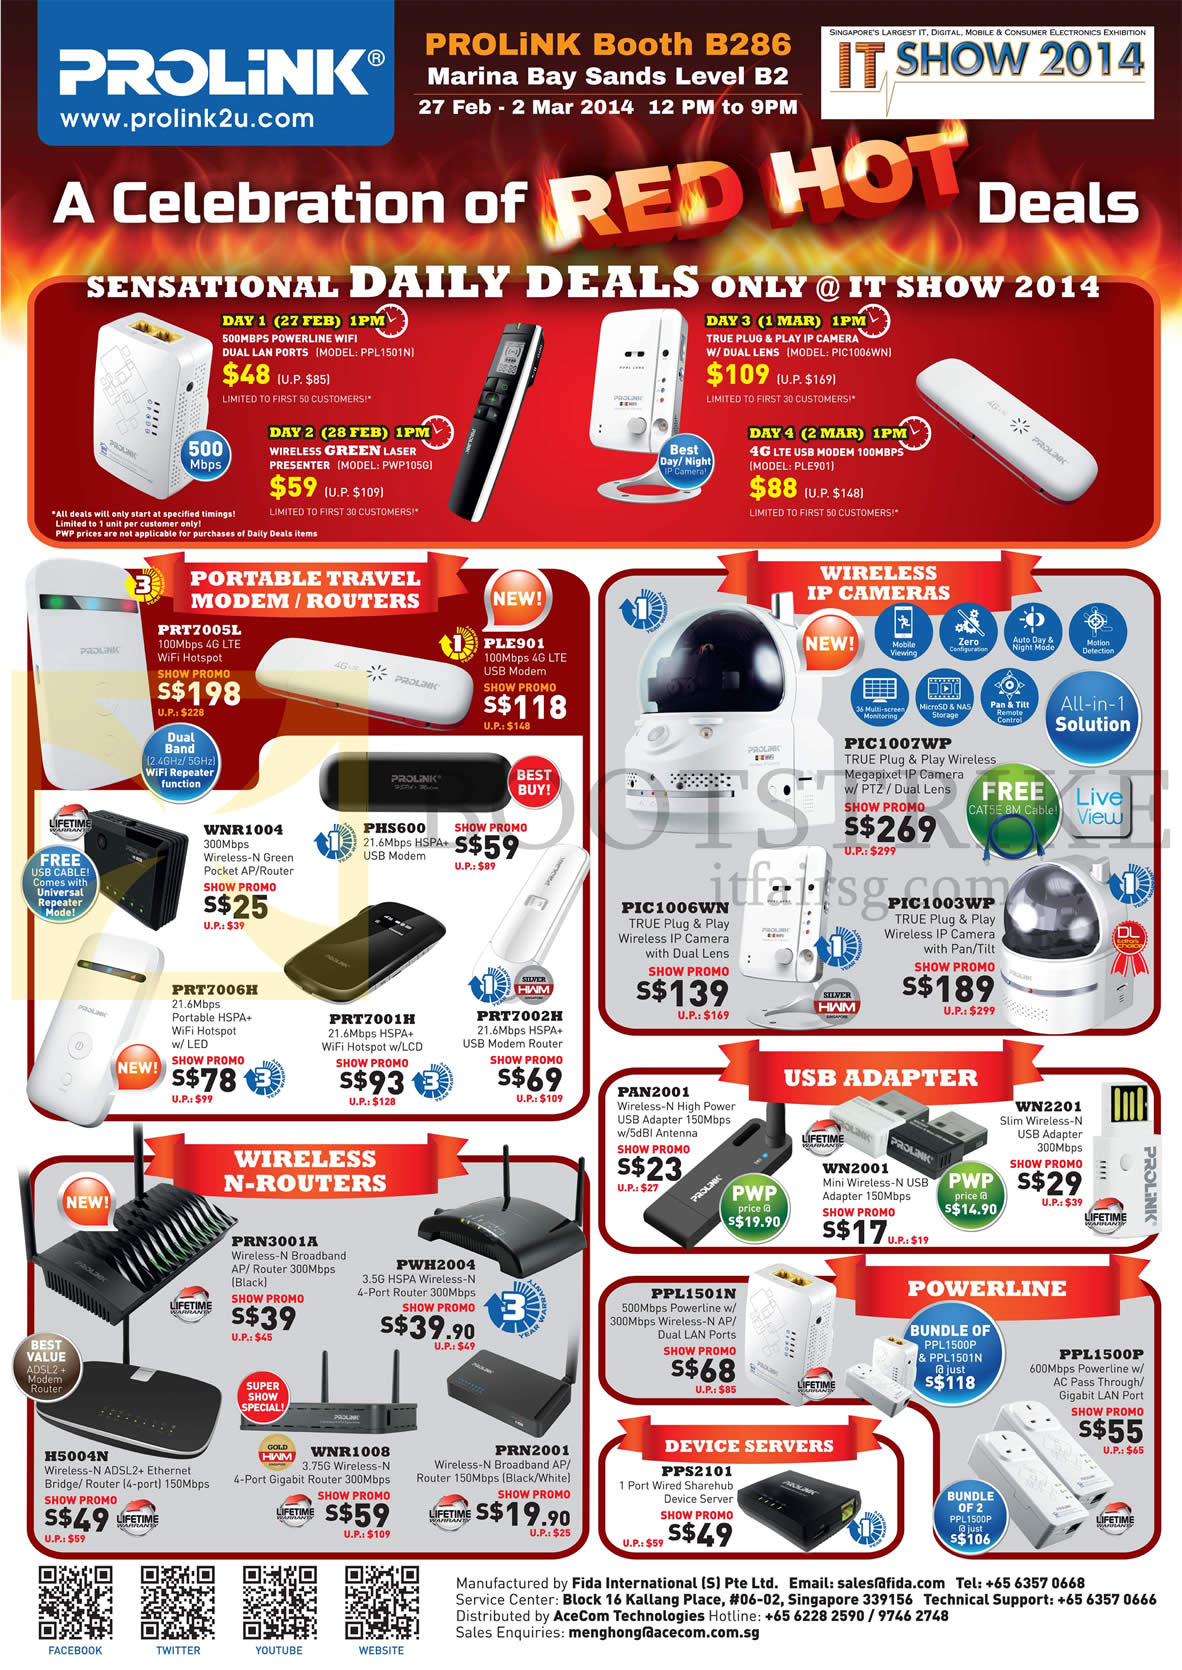 IT SHOW 2014 price list image brochure of Prolink Cybermind Daily Deals, Wireless Portable Travel Modem, Routers, Wireless IP Cameras, USB Adapter, Powerlink, Device Servers